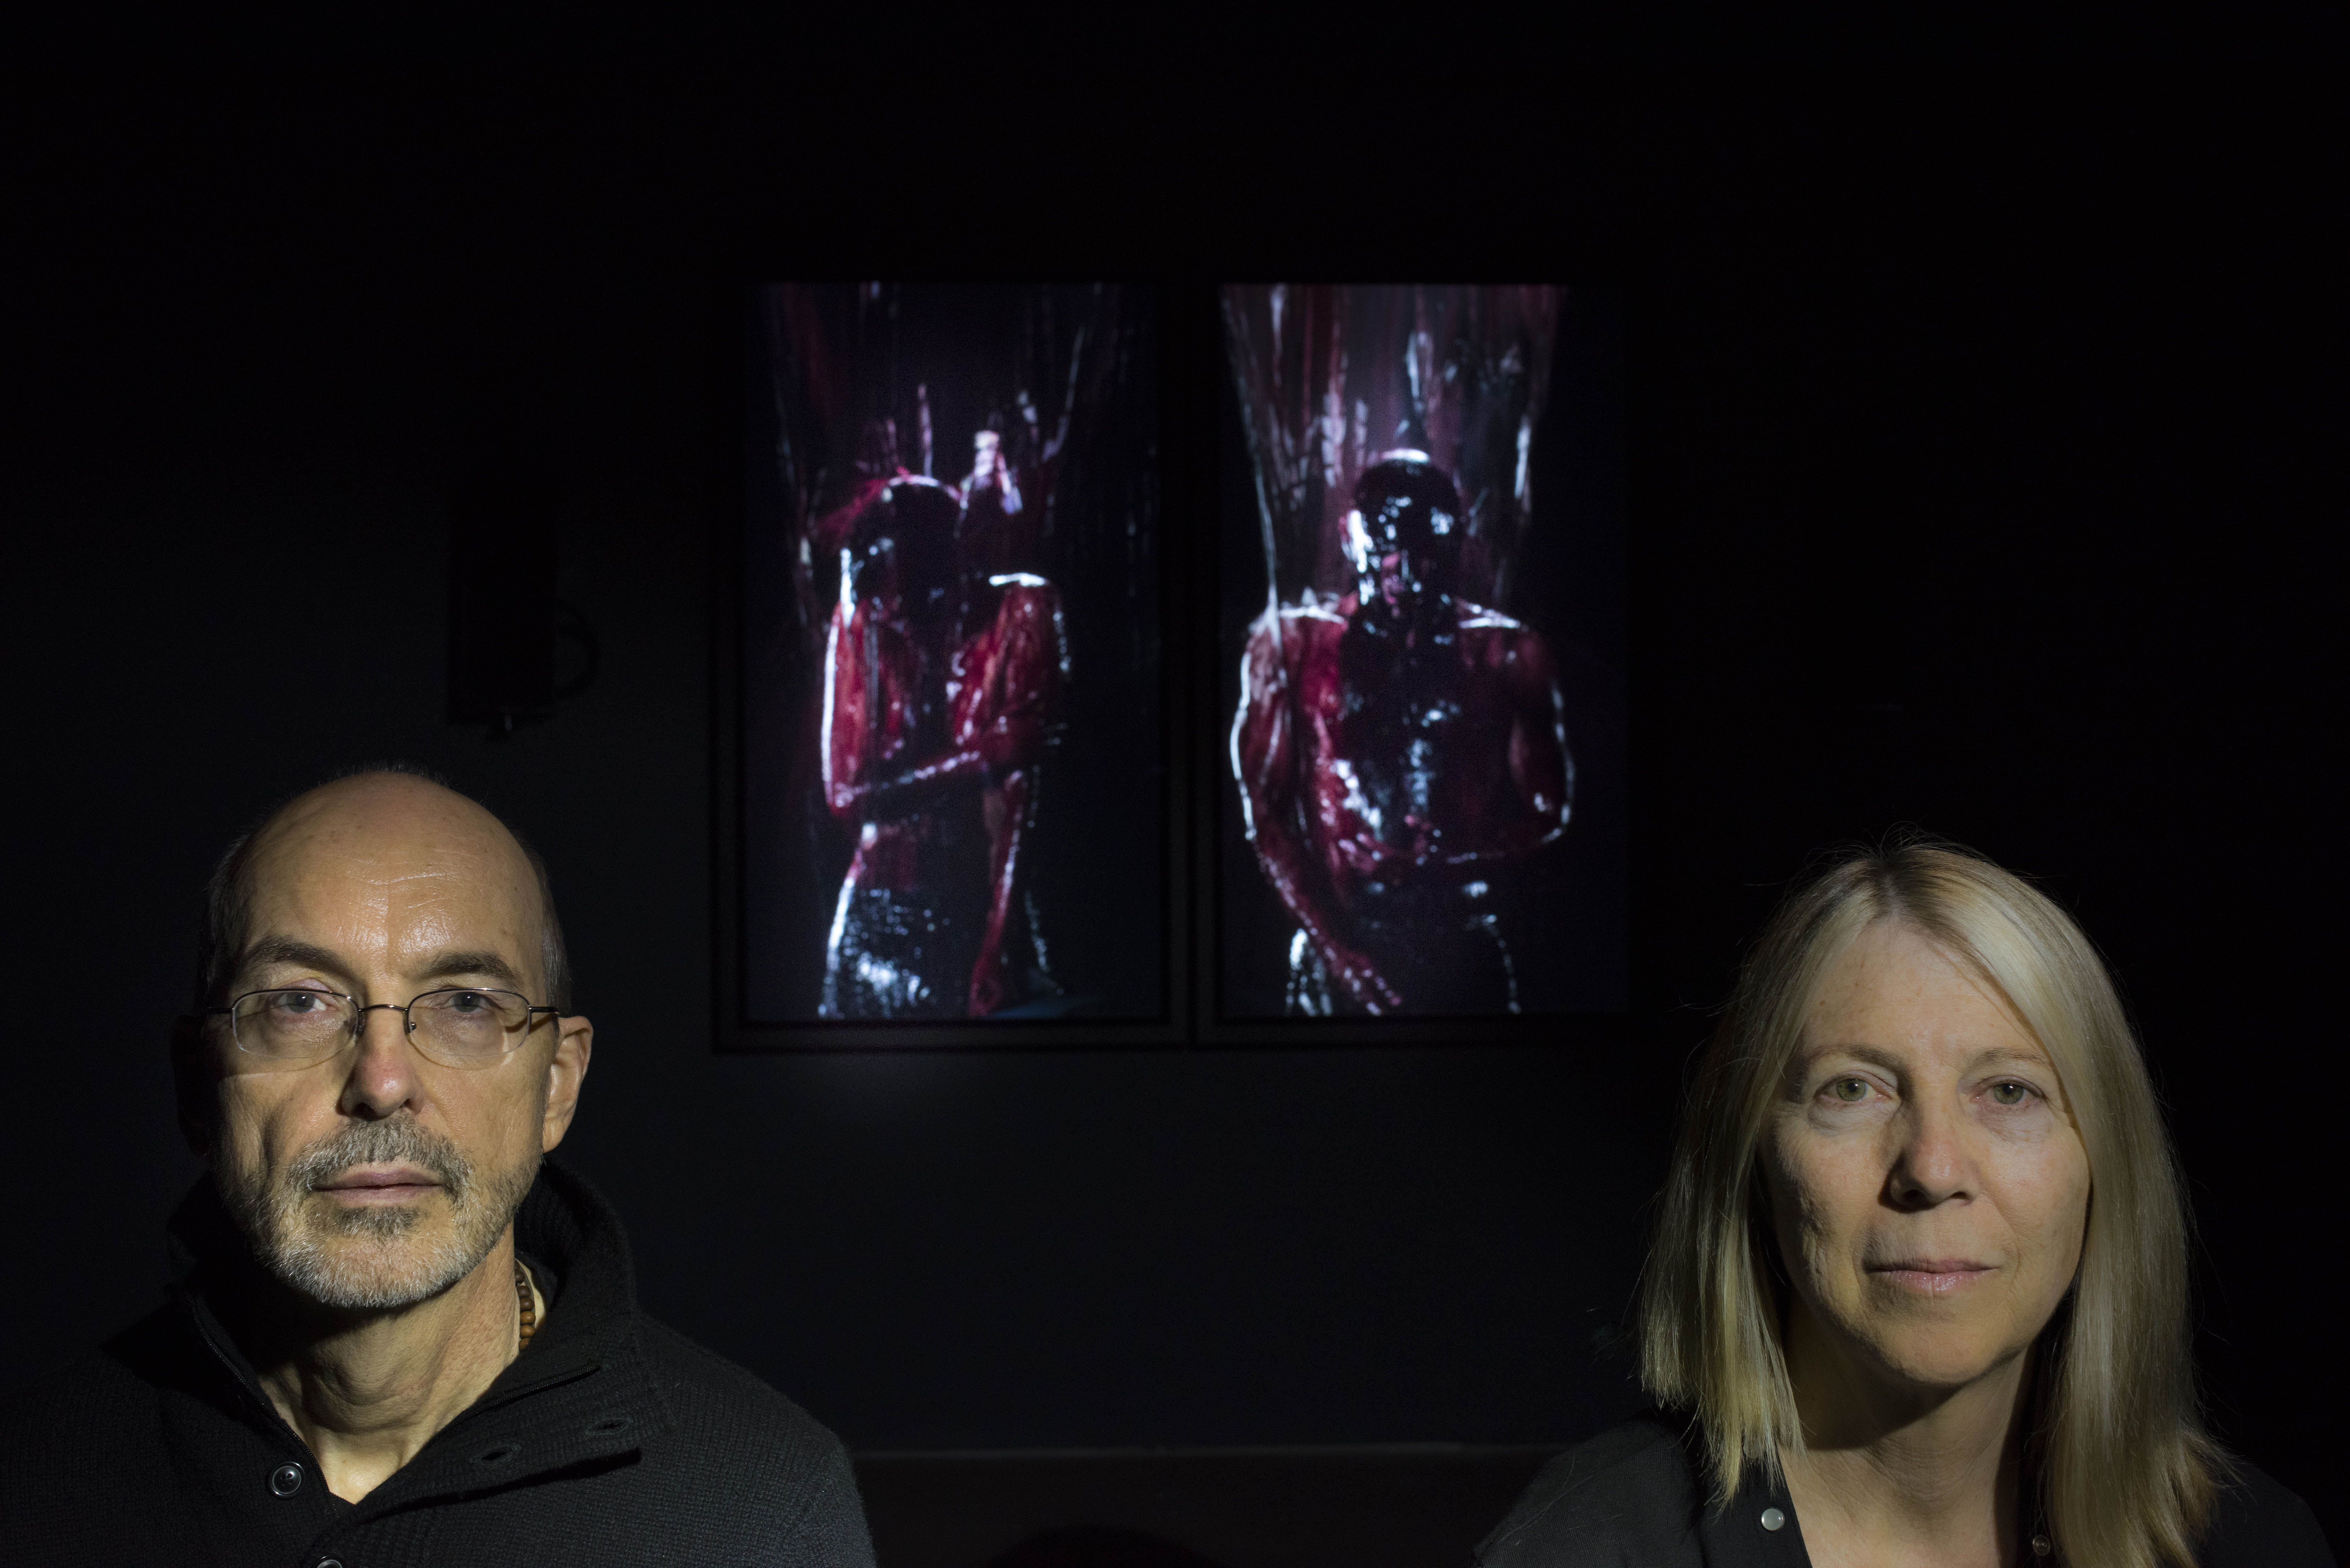 bill-viola-and-kira-perov-in-front-of-the-trial-2015-courtesy-bill-viola-studio-and-ysp-photo-©-jonty-wilde